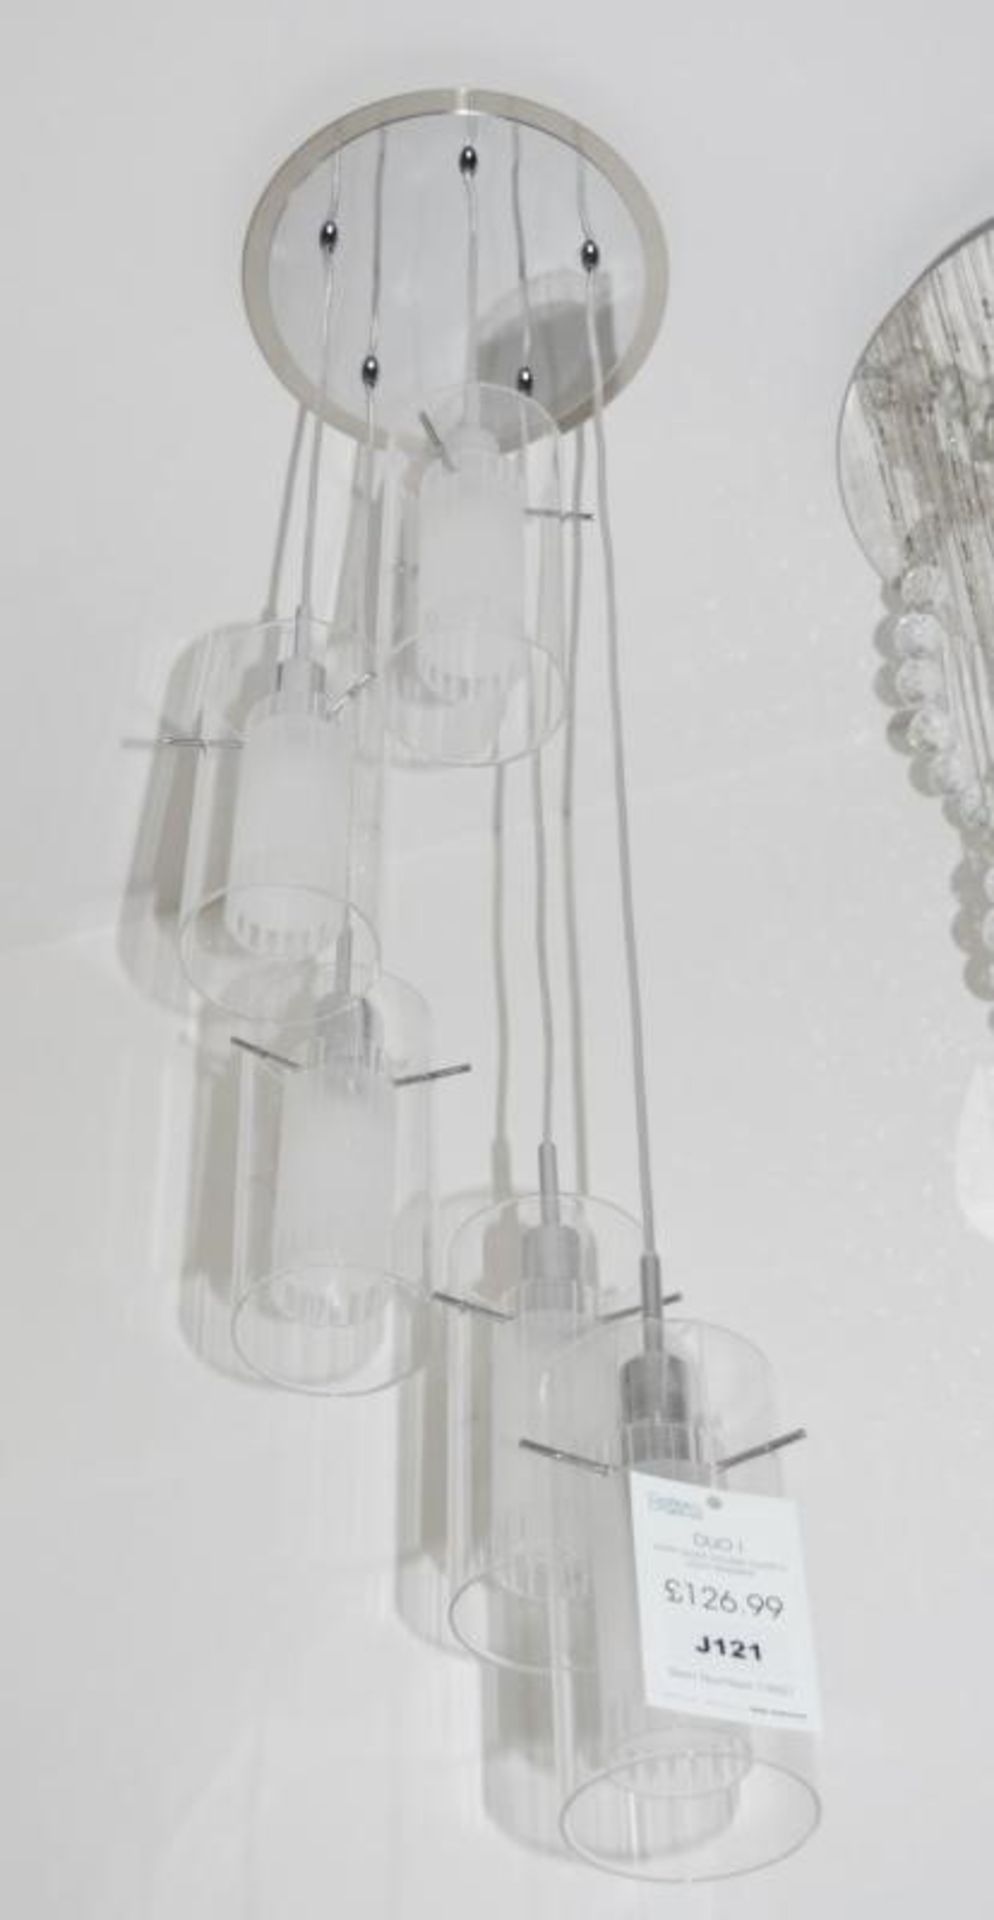 1 x DUO 1 5-Light Multi-drop Pendant With Double Glass Cylinder Shades - Finish: Satin Silver (Chrom - Image 3 of 3